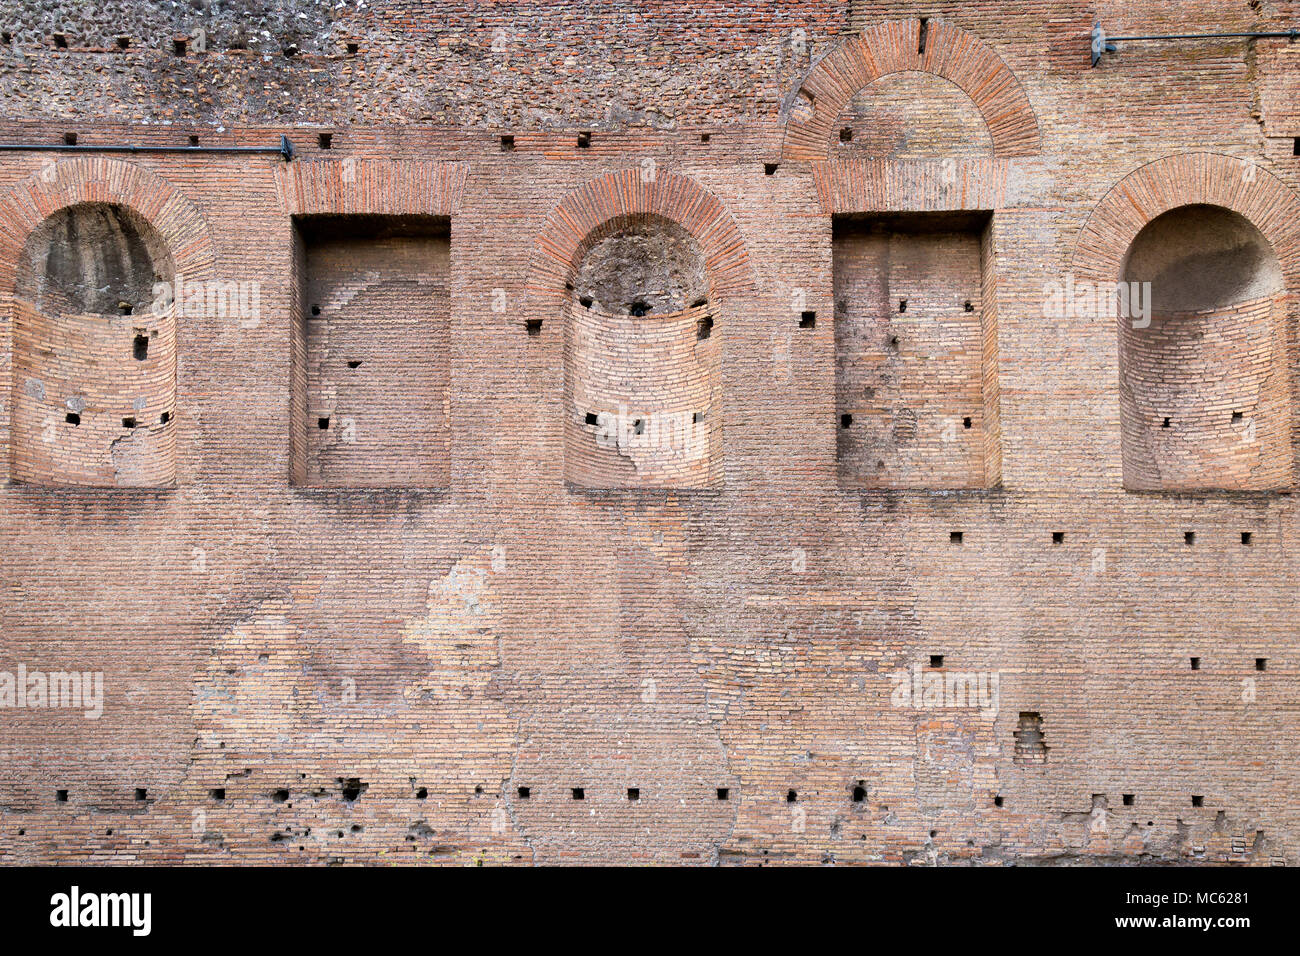 A section of brick wall with square and arched alcoves from the ancient palace ruins on Palatine Hill, Rome, Italy. Stock Photo